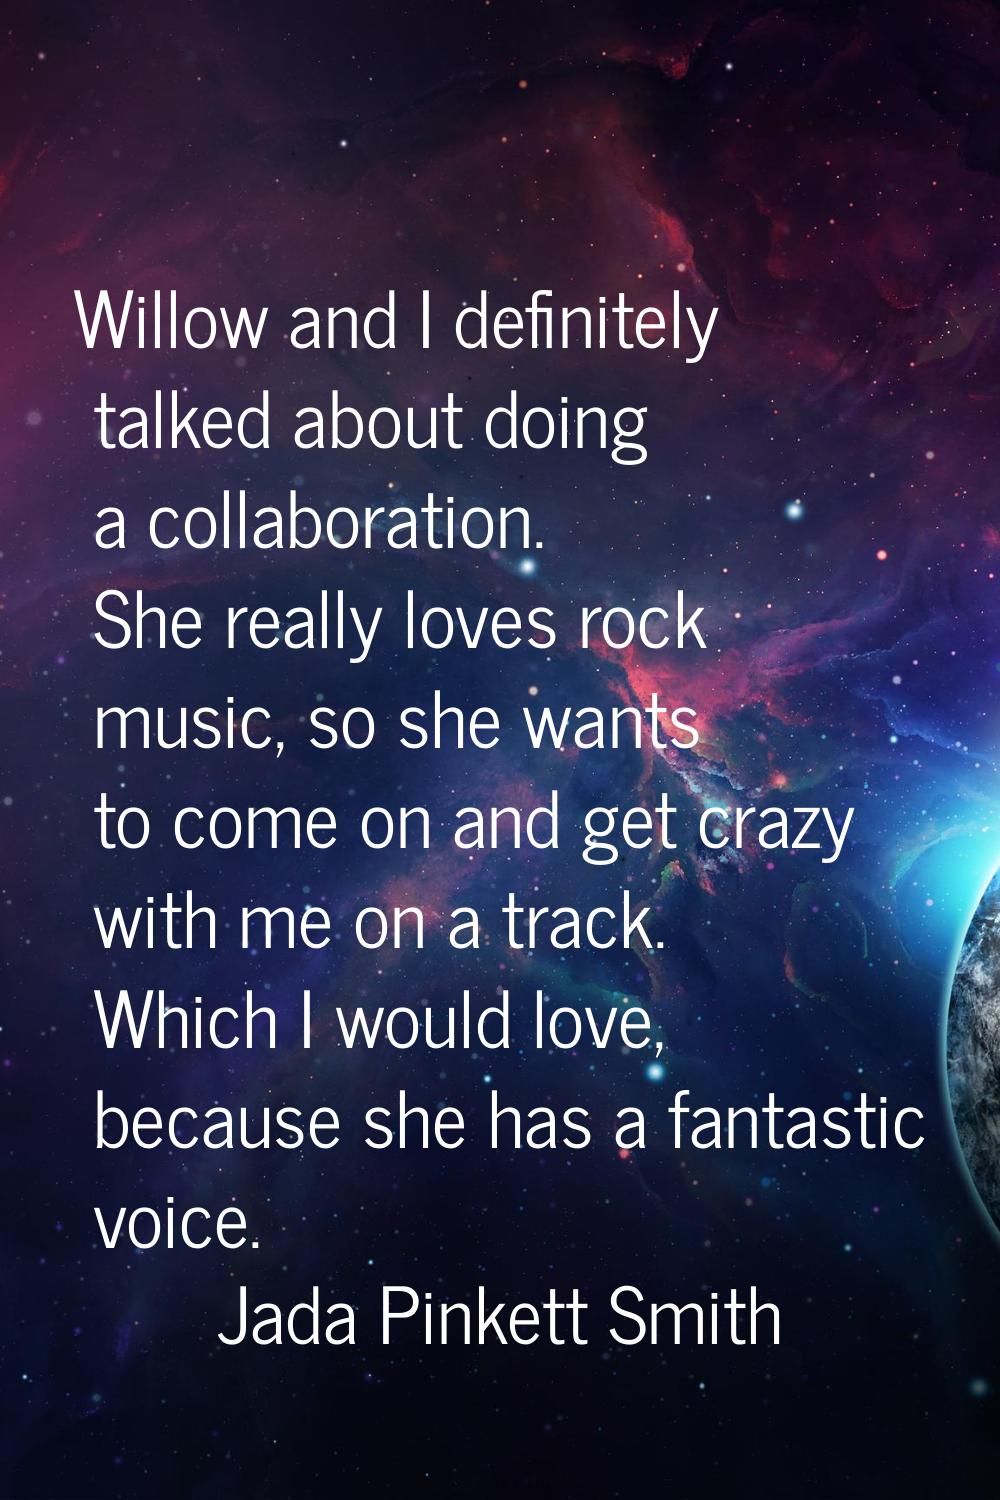 Willow and I definitely talked about doing a collaboration. She really loves rock music, so she wan